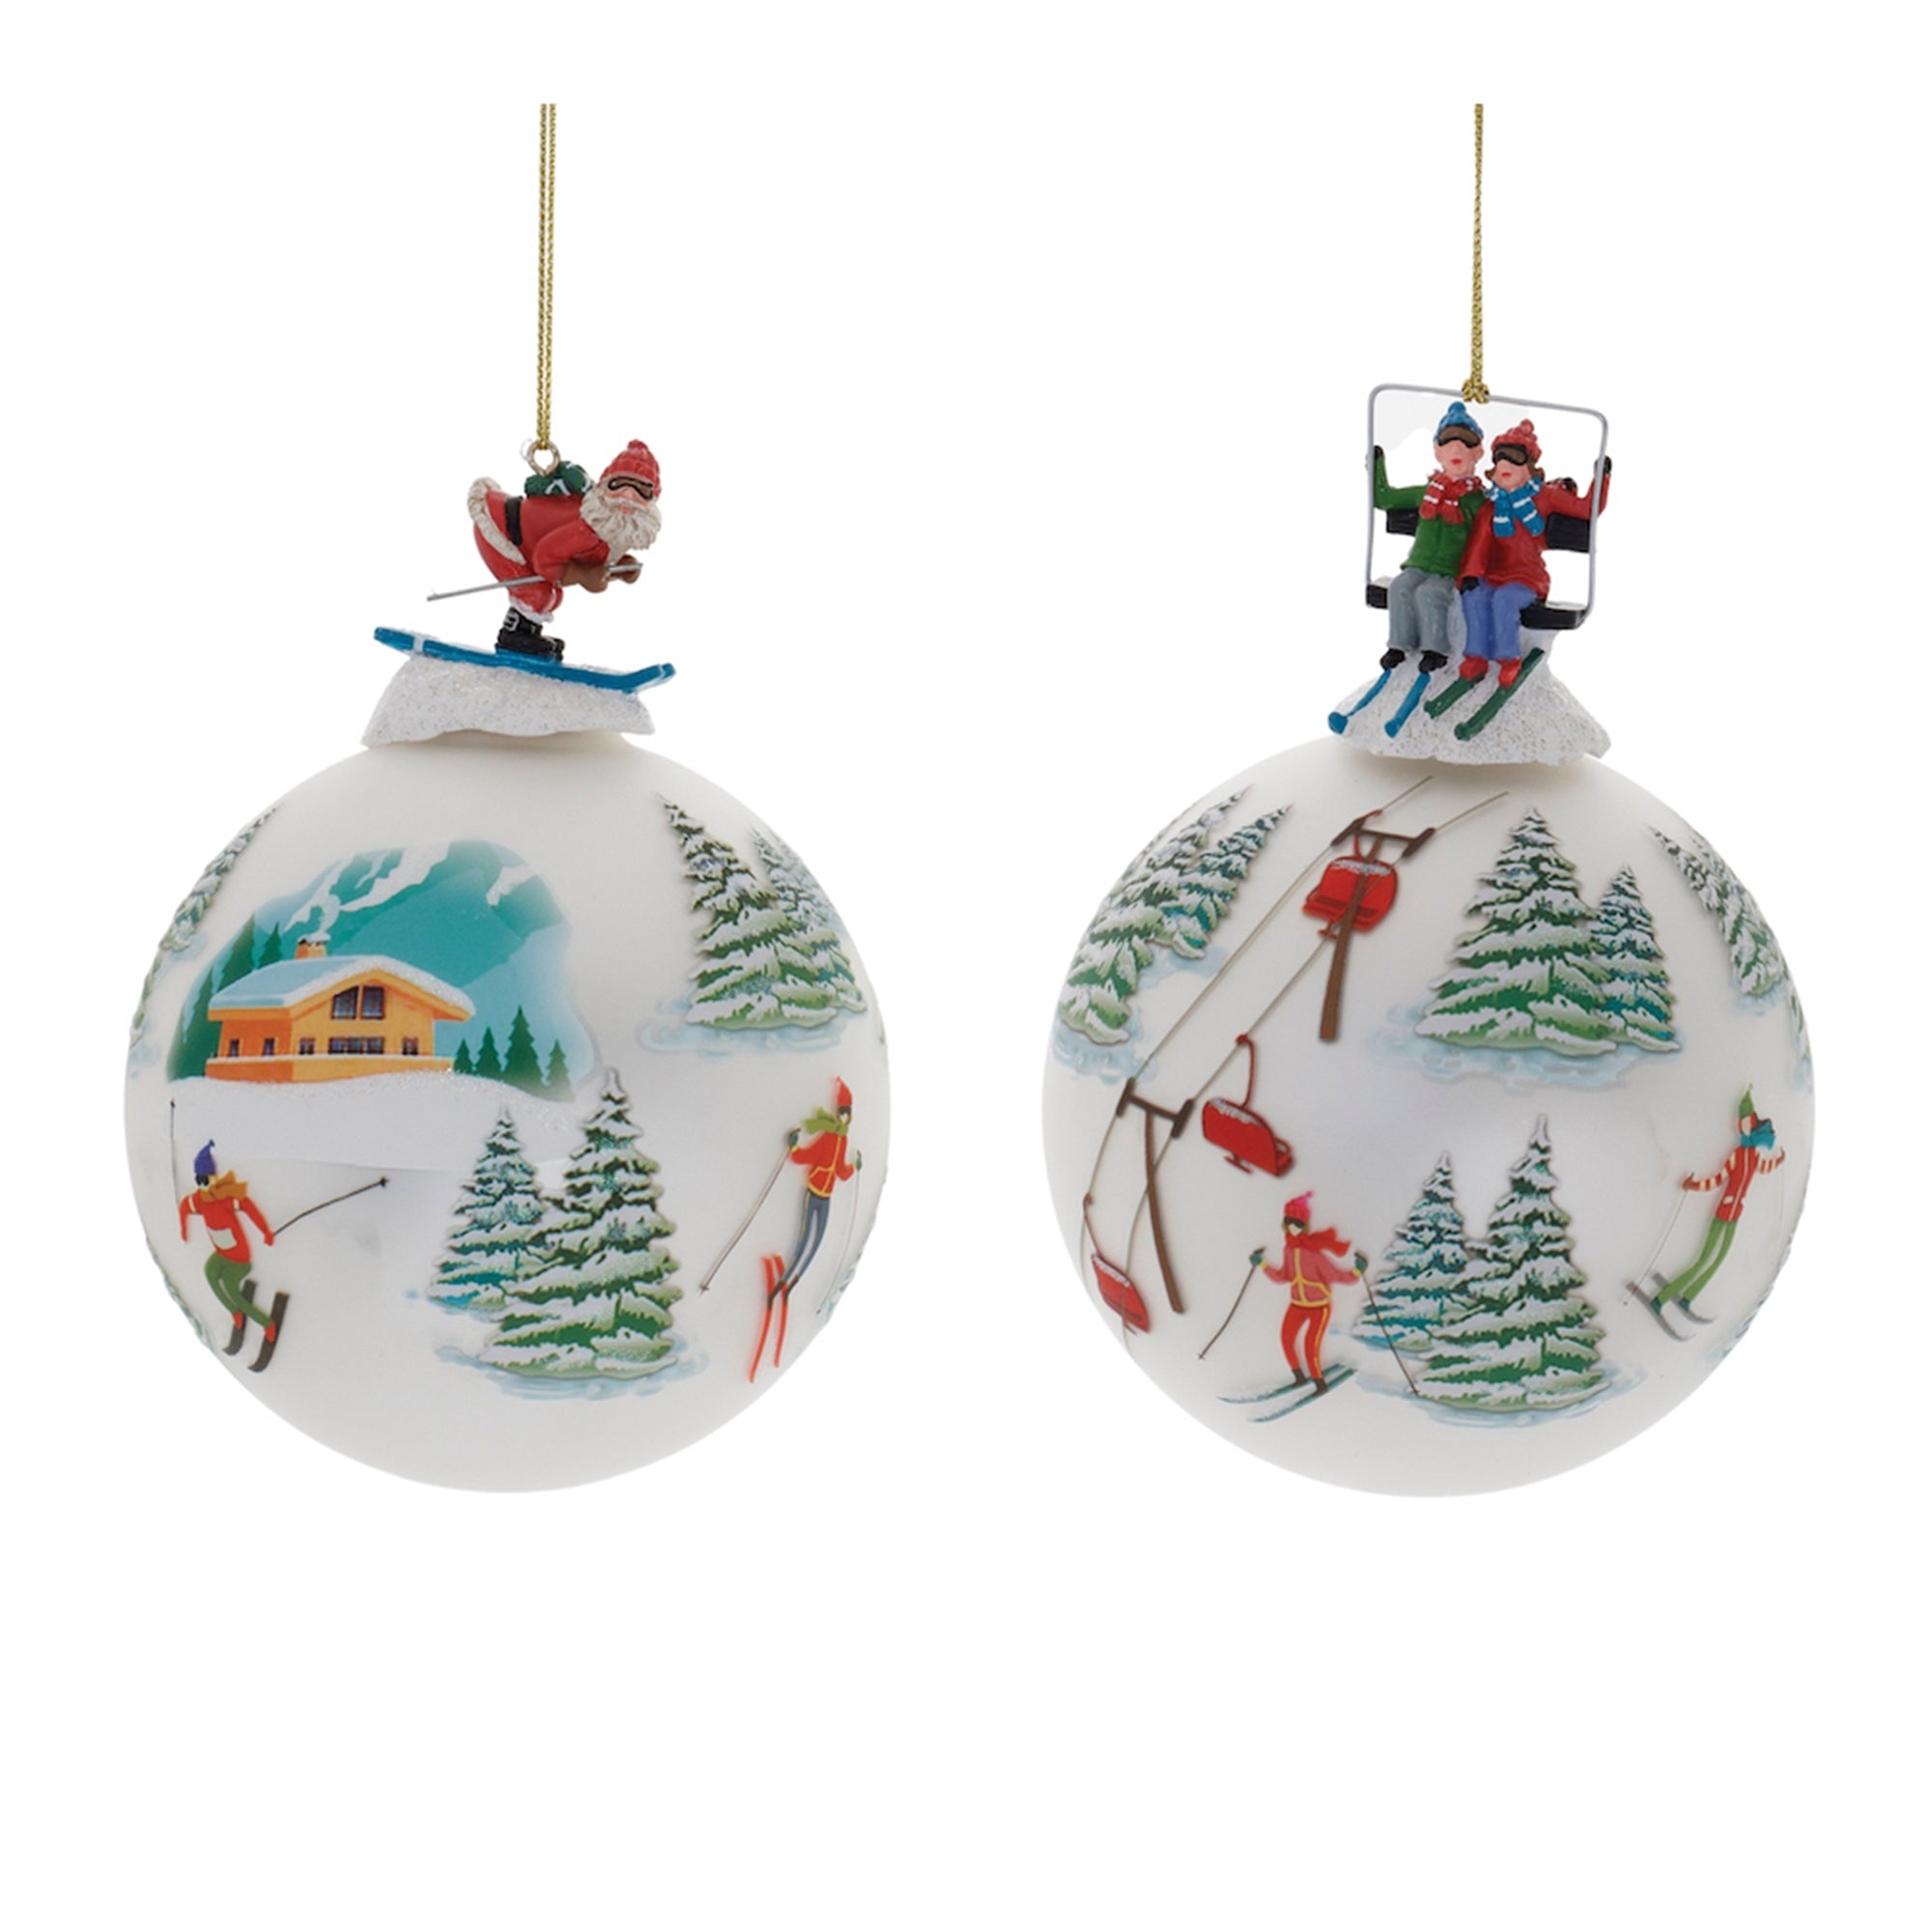 Ski Slope Glass Ball Oranment with Character Accents (Set of 6)